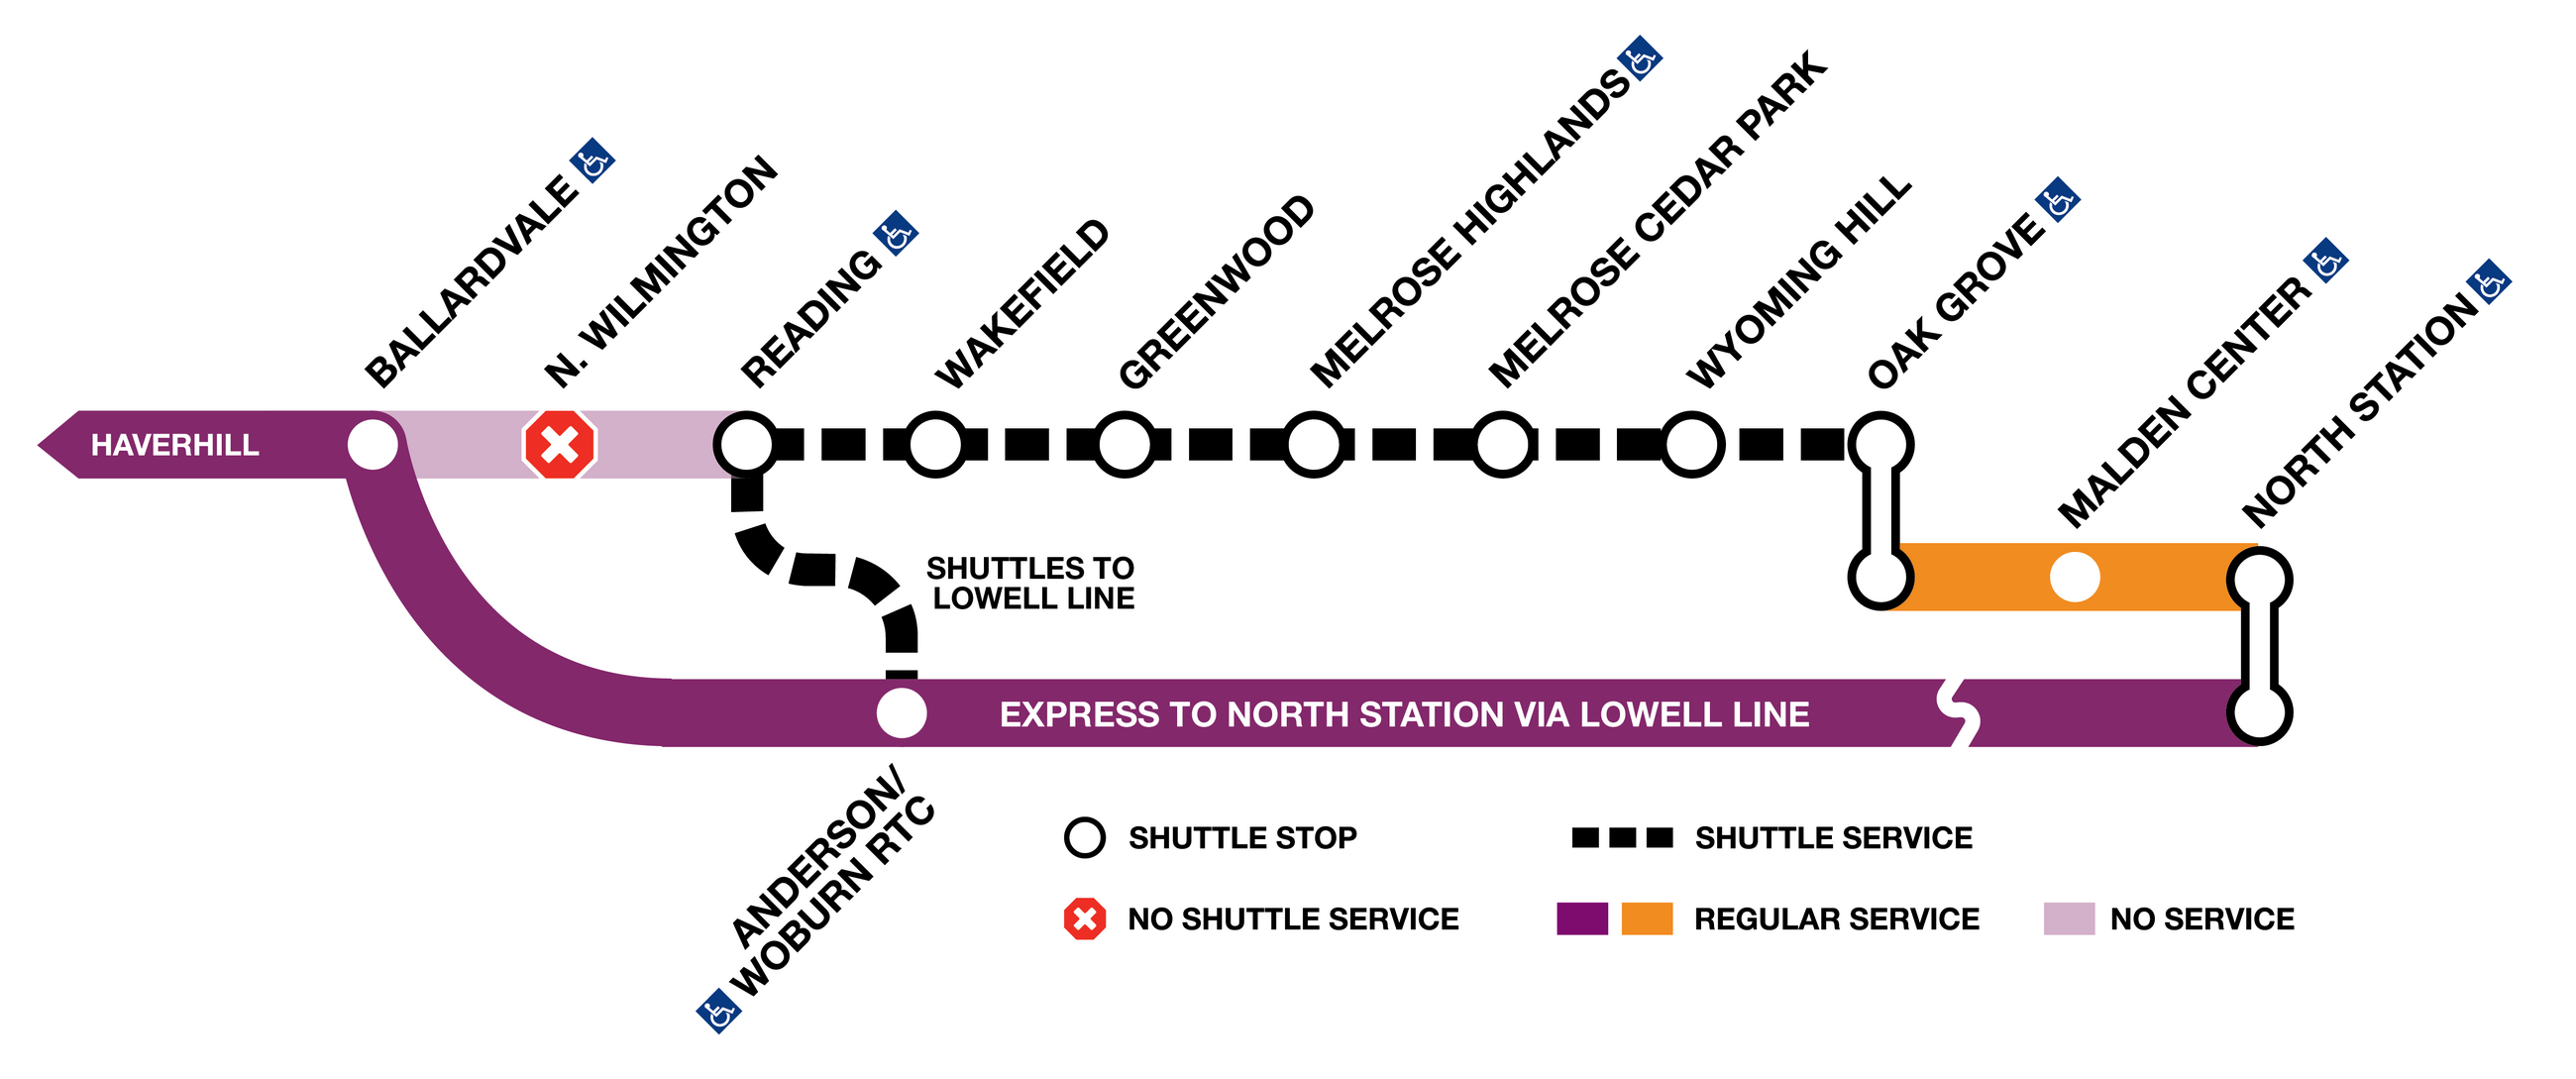 Haverhill Line, no commuter rail service between North Wilmington and Oak Grove. shuttle buses replace service, except at North Wilmington where there is no service